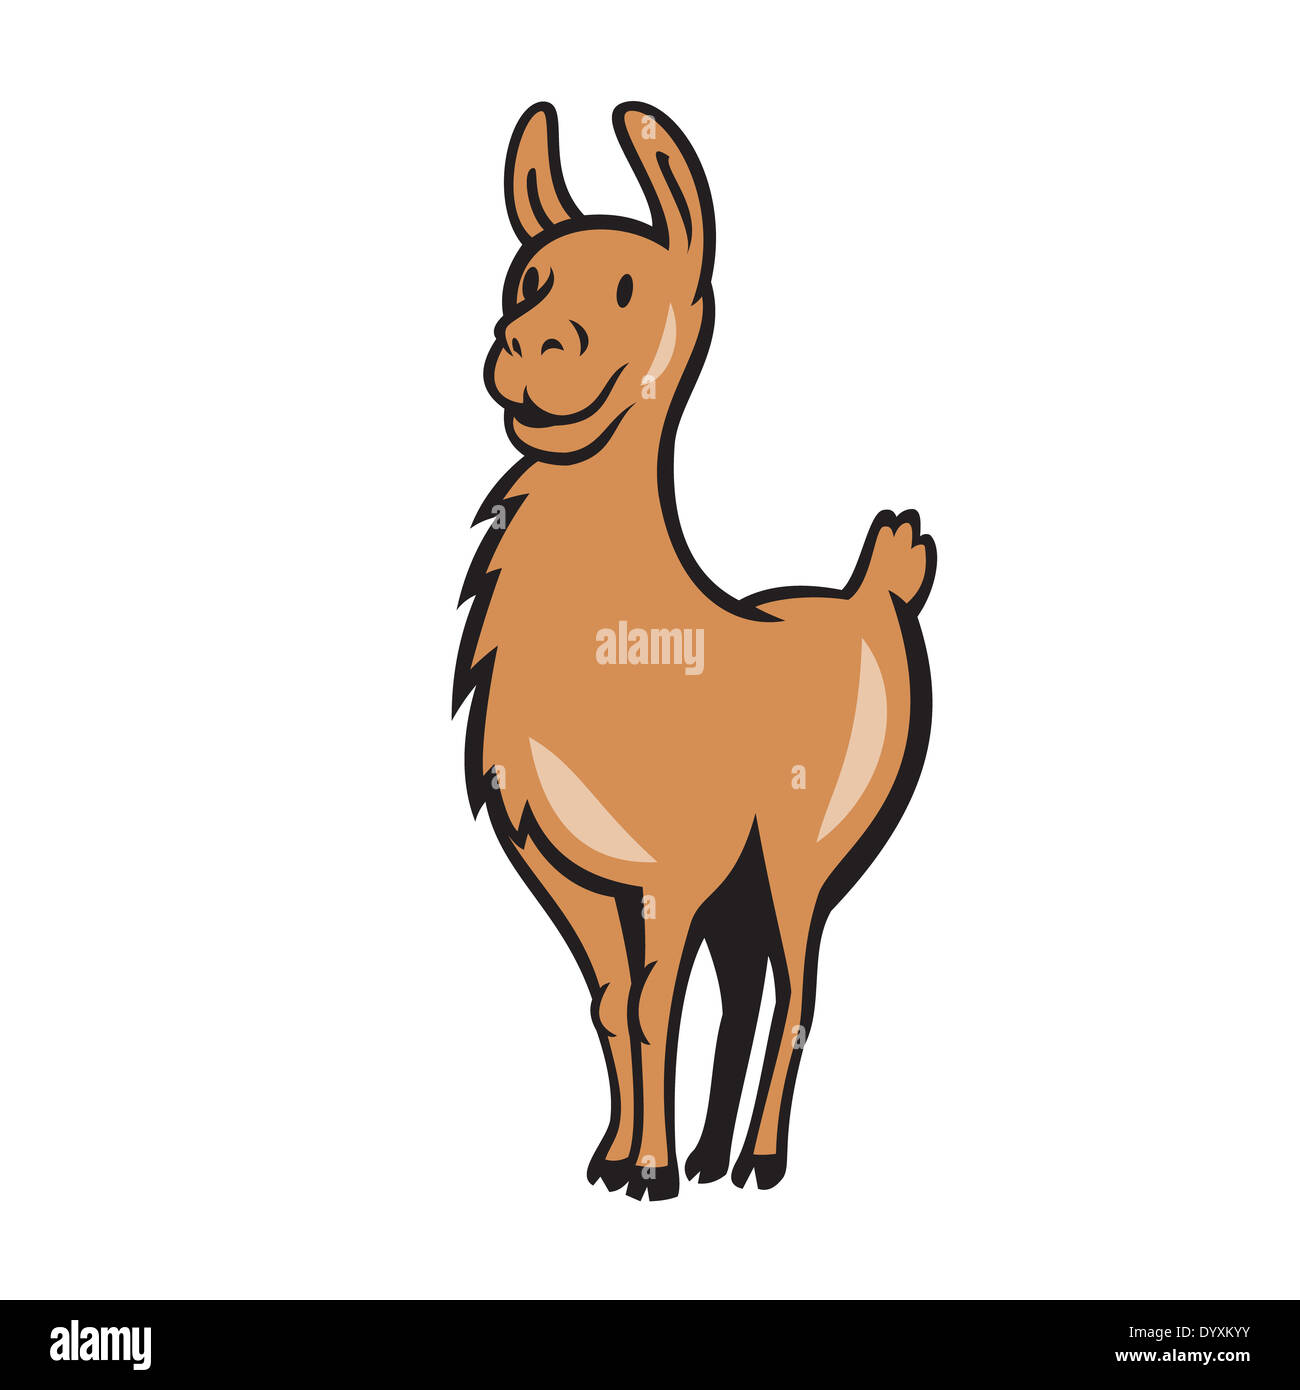 Illustration of a llama standing facing front done in cartoon style on isolated background. Stock Photo